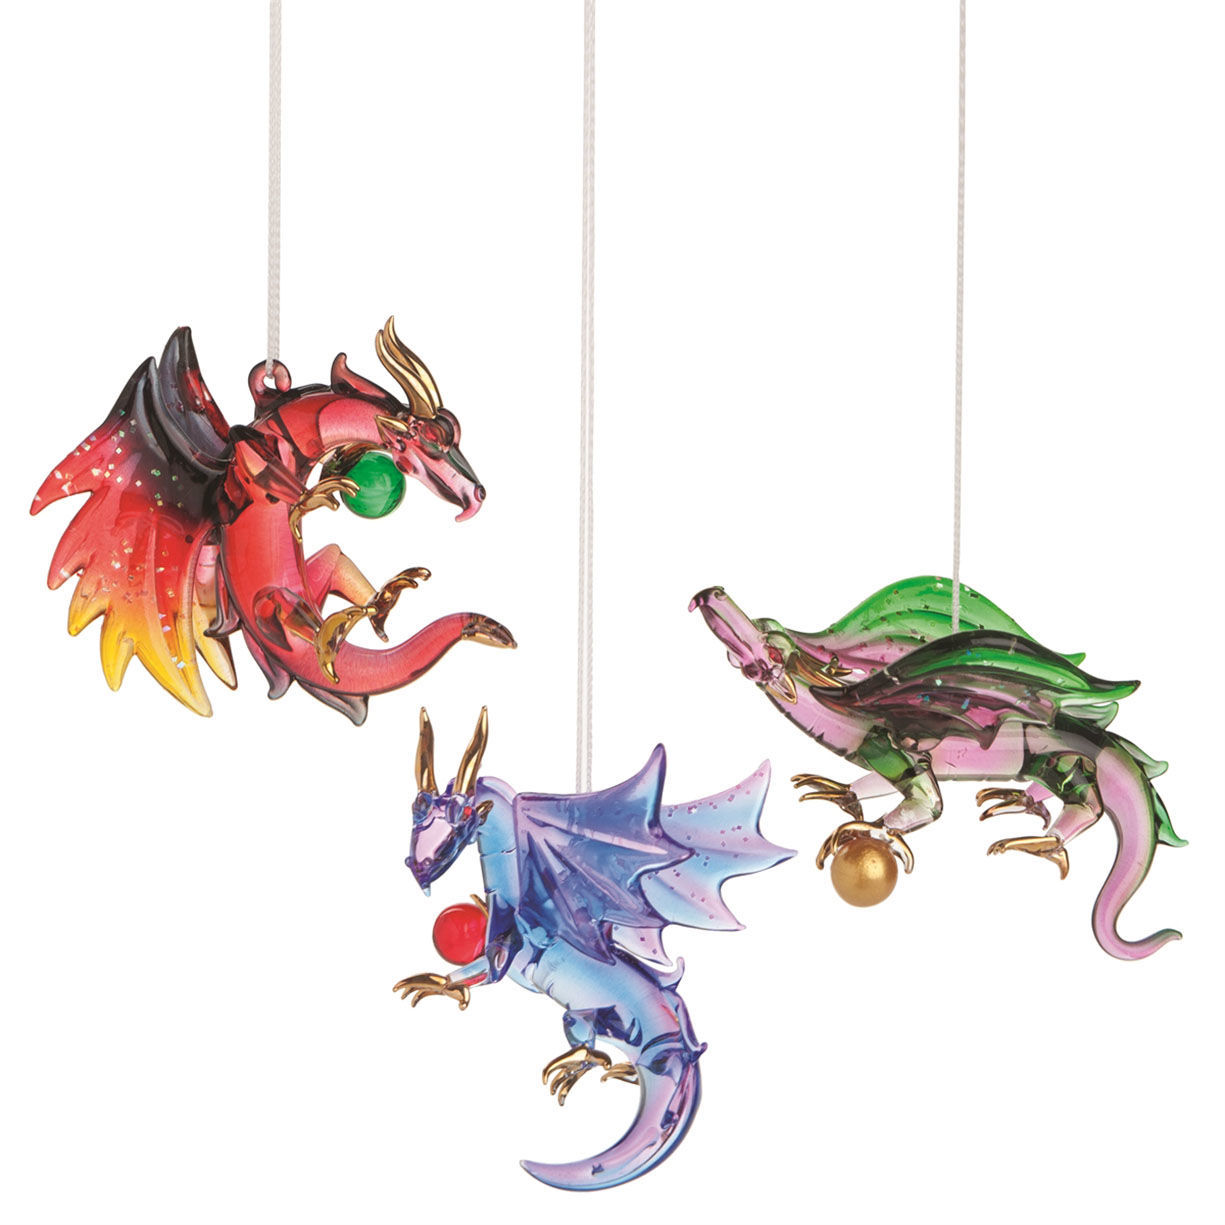 Set of 3 Dragons Handblown Glass Ornaments, each dragon has wings, horn and a ball